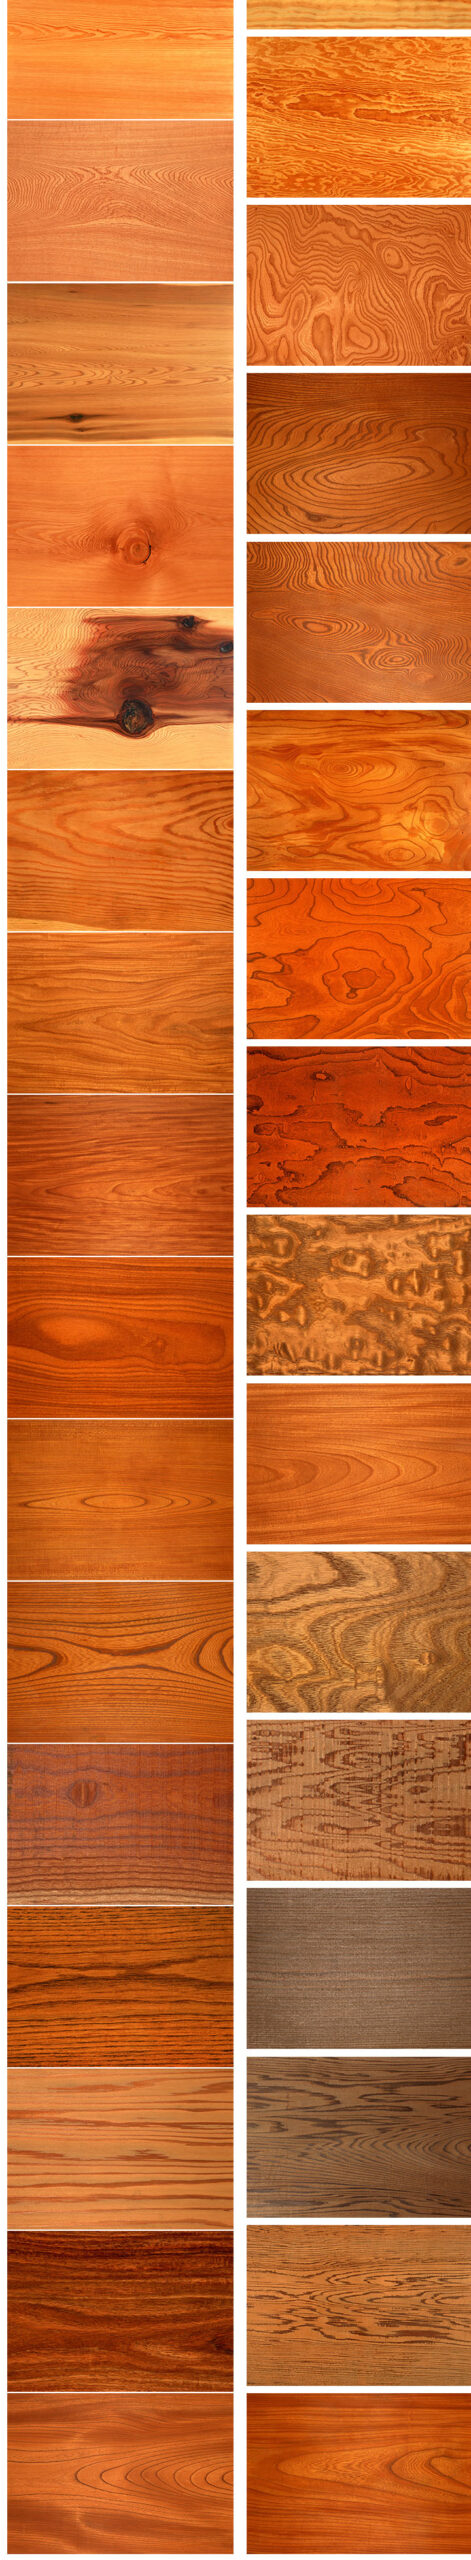 315+ Wooden Texture Full HD Free Download 2023 Pack- Trending